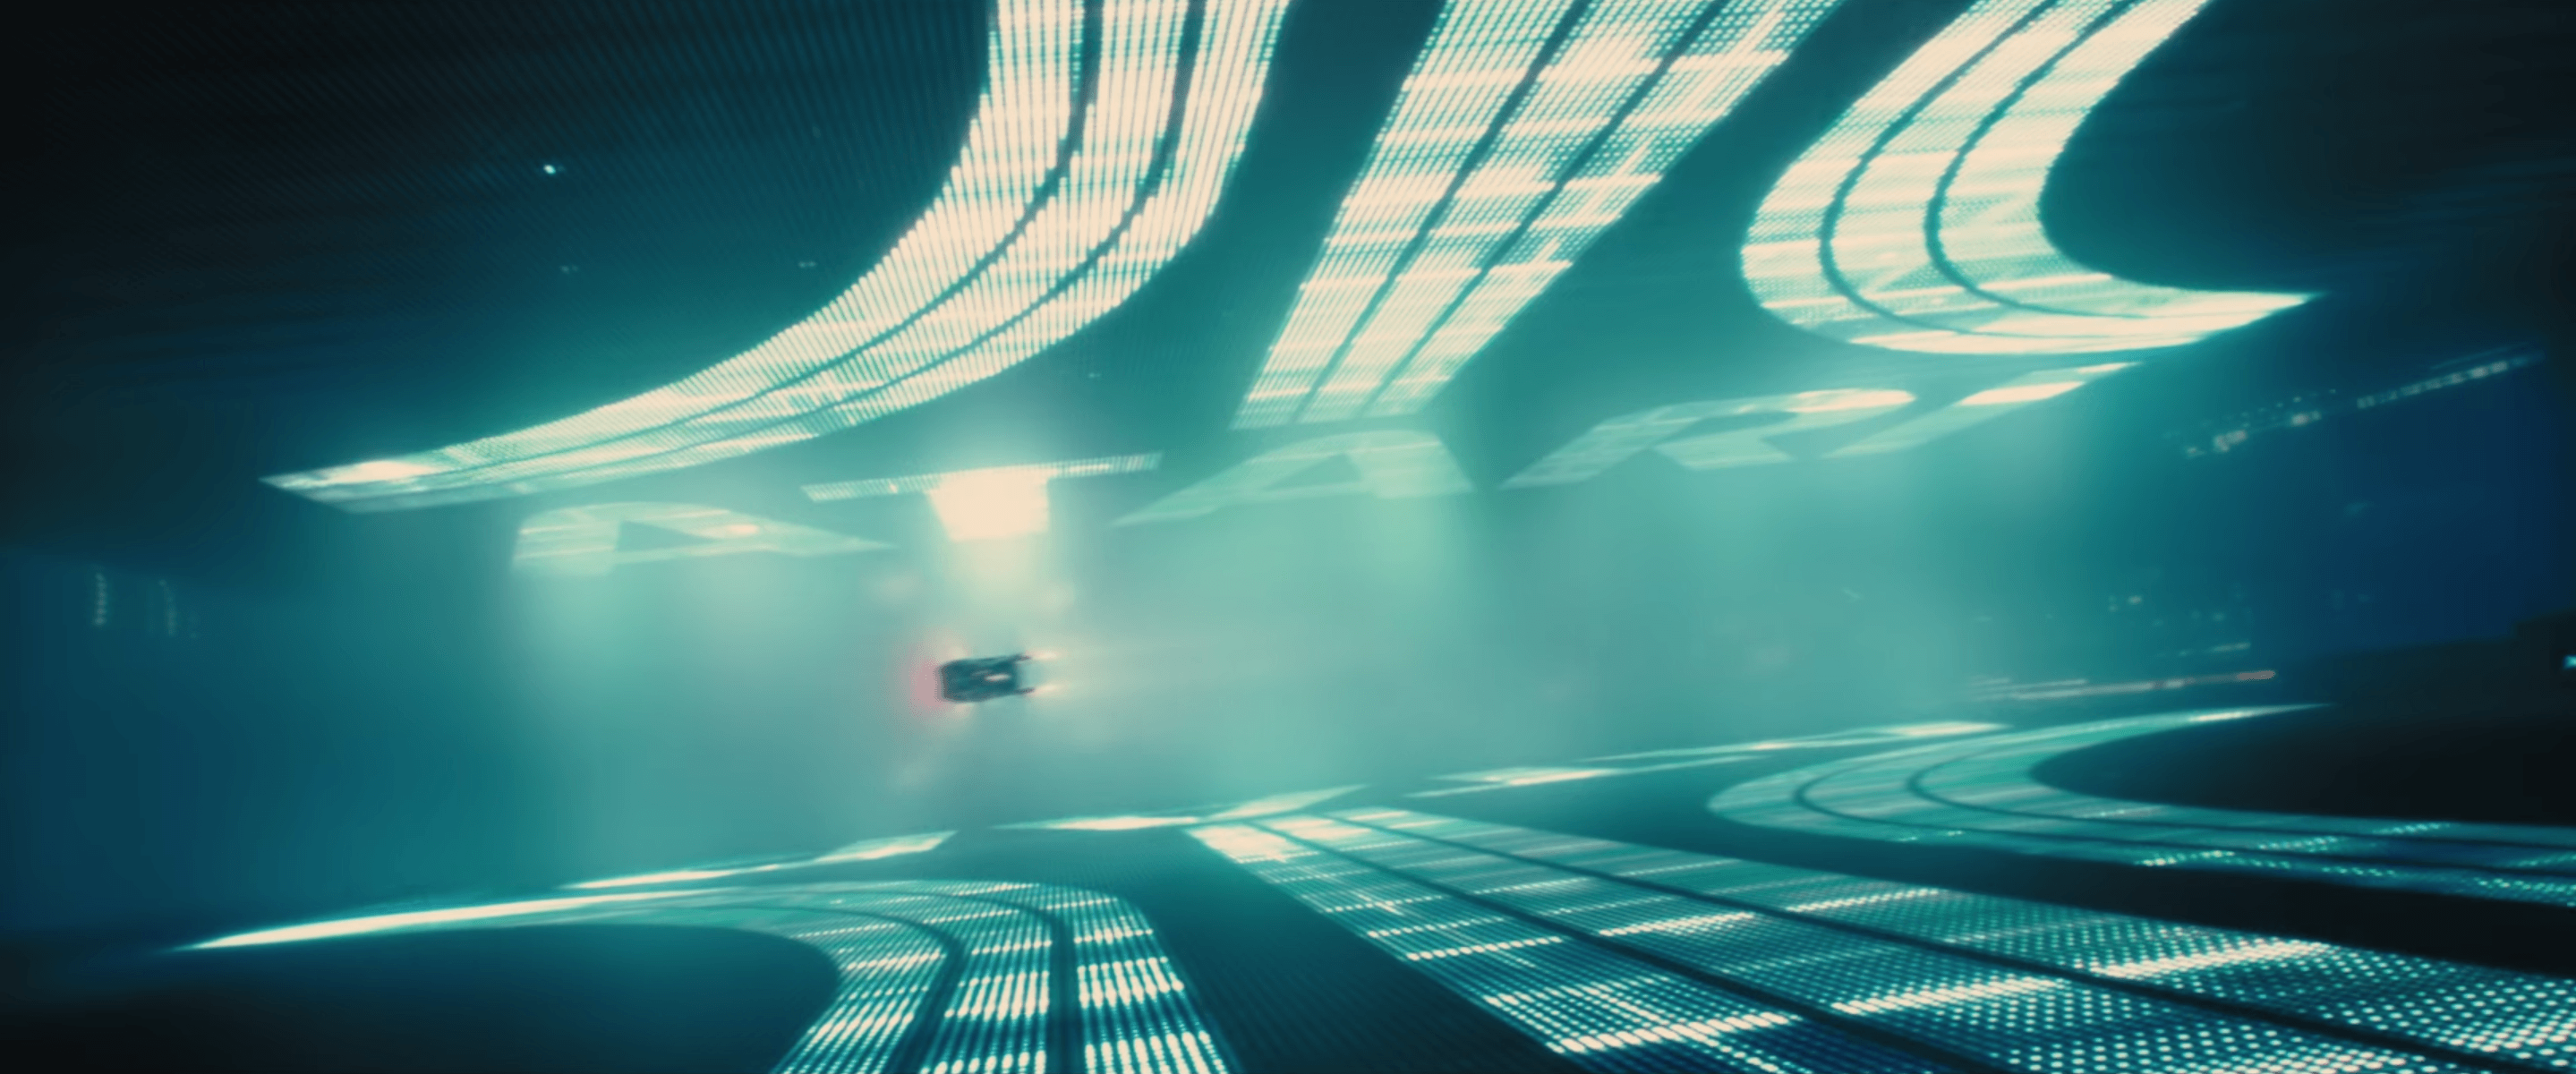 A Peak inside the Cinematography of Blade Runner 2049. A